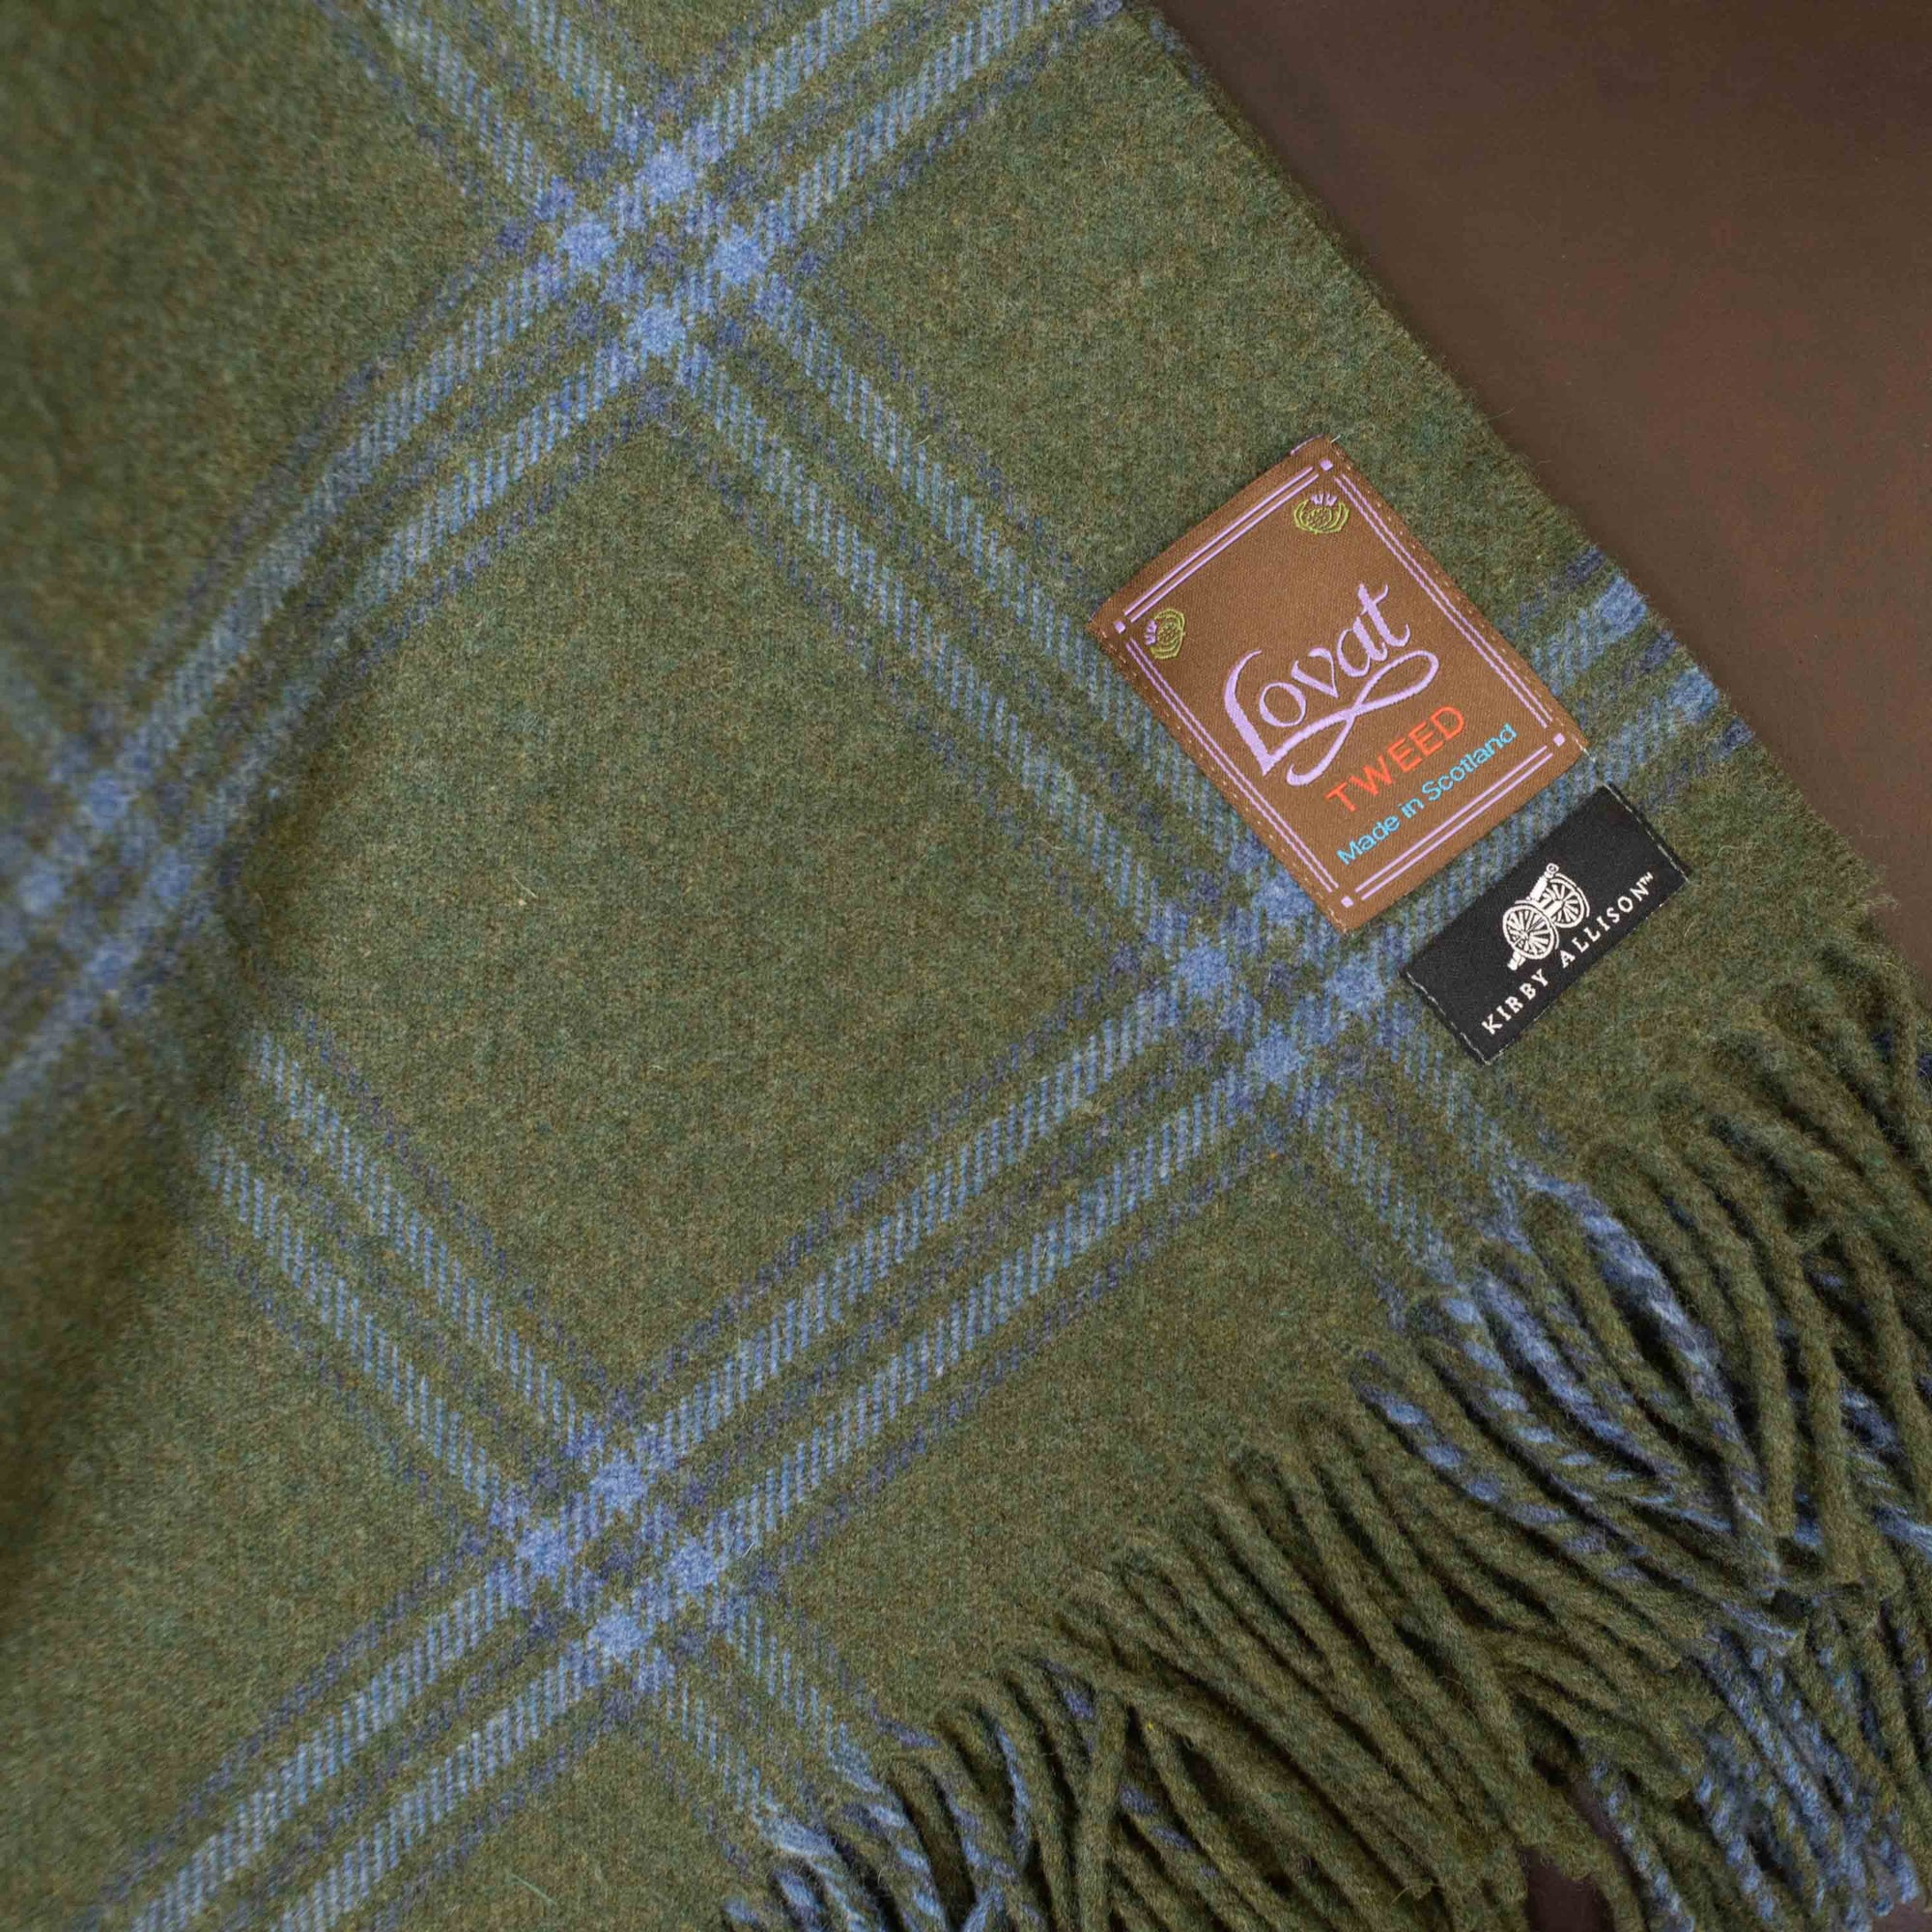 A new Kirby Allison Lovat Mill Suit to Shoot Tweed Wool Throw blanket in green and blue plaid.